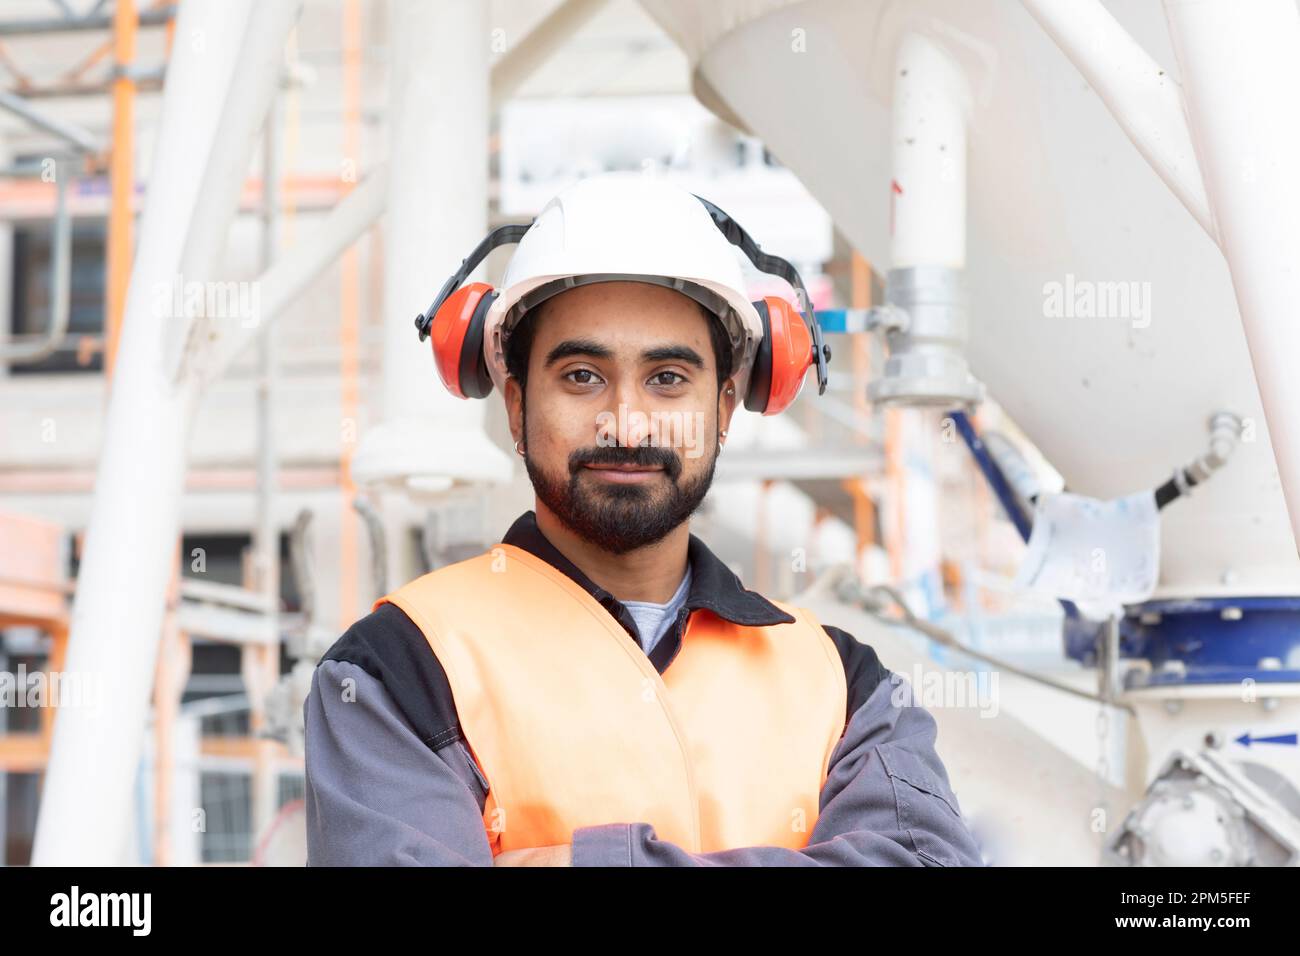 young technician safety glasses and helmet working Stock Photo